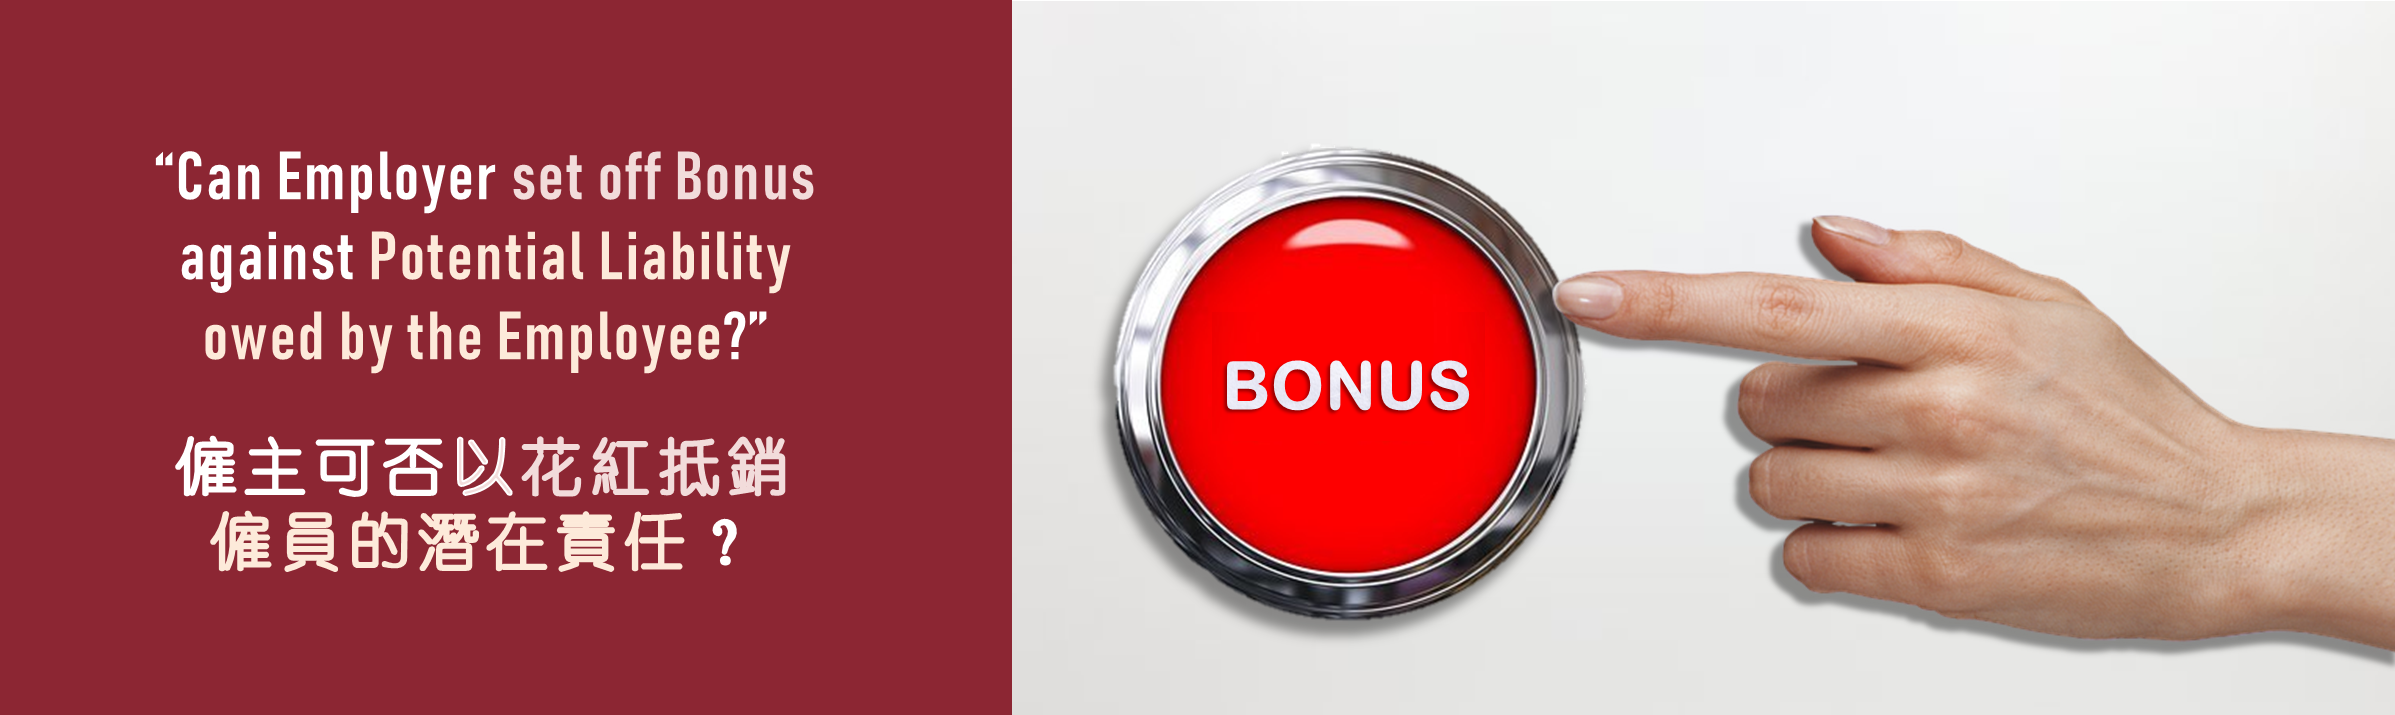 Can employer set off bonus against potential liability owed by the employee?